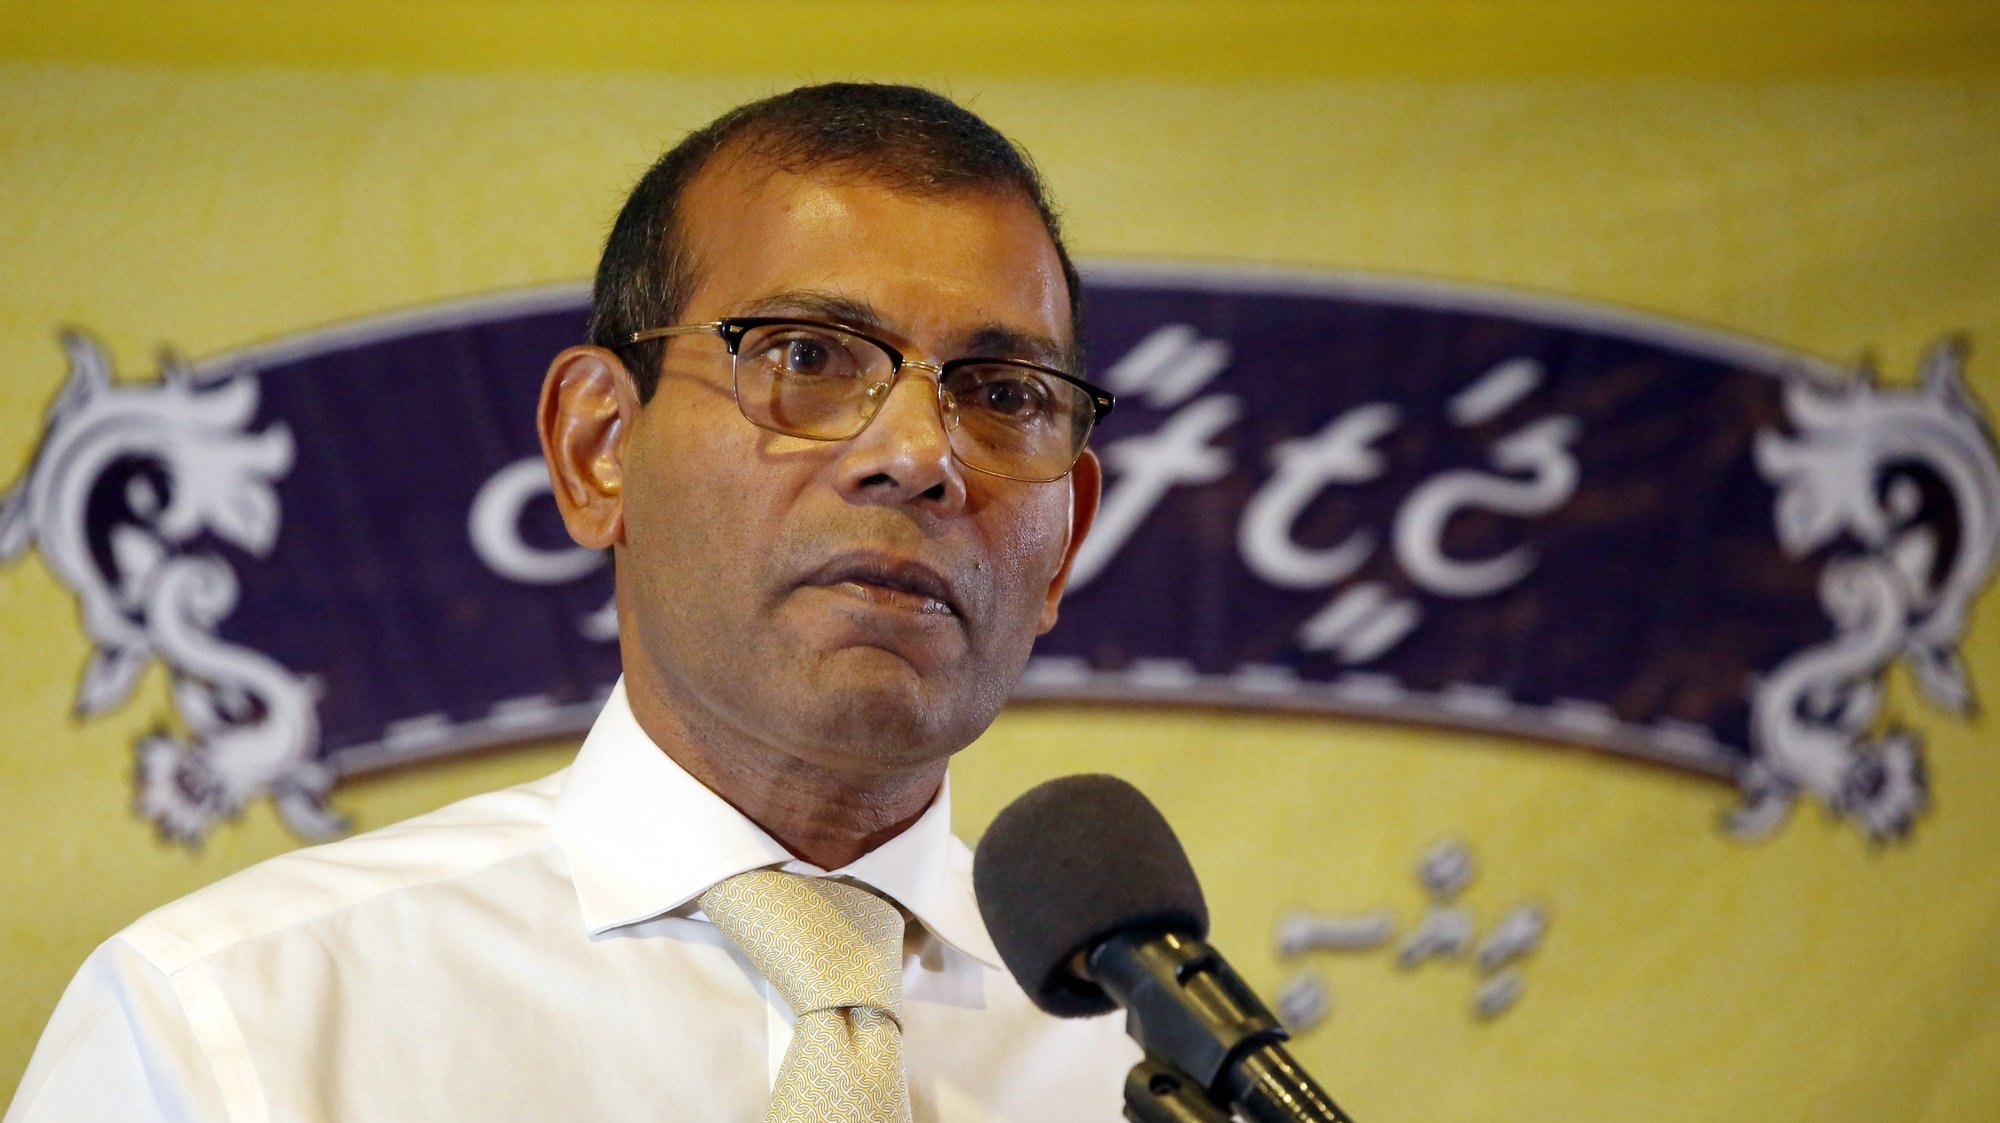 epa07489852 (FILE) - Former Maldivian president Mohamed Nasheed addresses the gathering of Maldivian nationals residing in Colombo, during a meeting organized by the Maldivian Joint Opposition on behalf of presidential candidate Ibrahim Mohamed Solih (unseen) at the Janakie Hotel in Colombo, Sri Lanka, 21 September 2018, reissued 07 April 2019.  Media reports on 07 April 2019 state that President Ibrahim Mohamed Solih&#039;s party the Maldivian Democratic Party (MDP) is forecast to win almost 60 seats in the 87-seat parliament, and heads to victory in the country&#039;s parliamentary election. Former president and MDP leader Mohamed Nasheed, was in exile until late 2018 and the MDP win would secure Nasheed&#039;s comeback.  EPA/M.A.PUSHPA KUMARA *** Local Caption *** 54643967